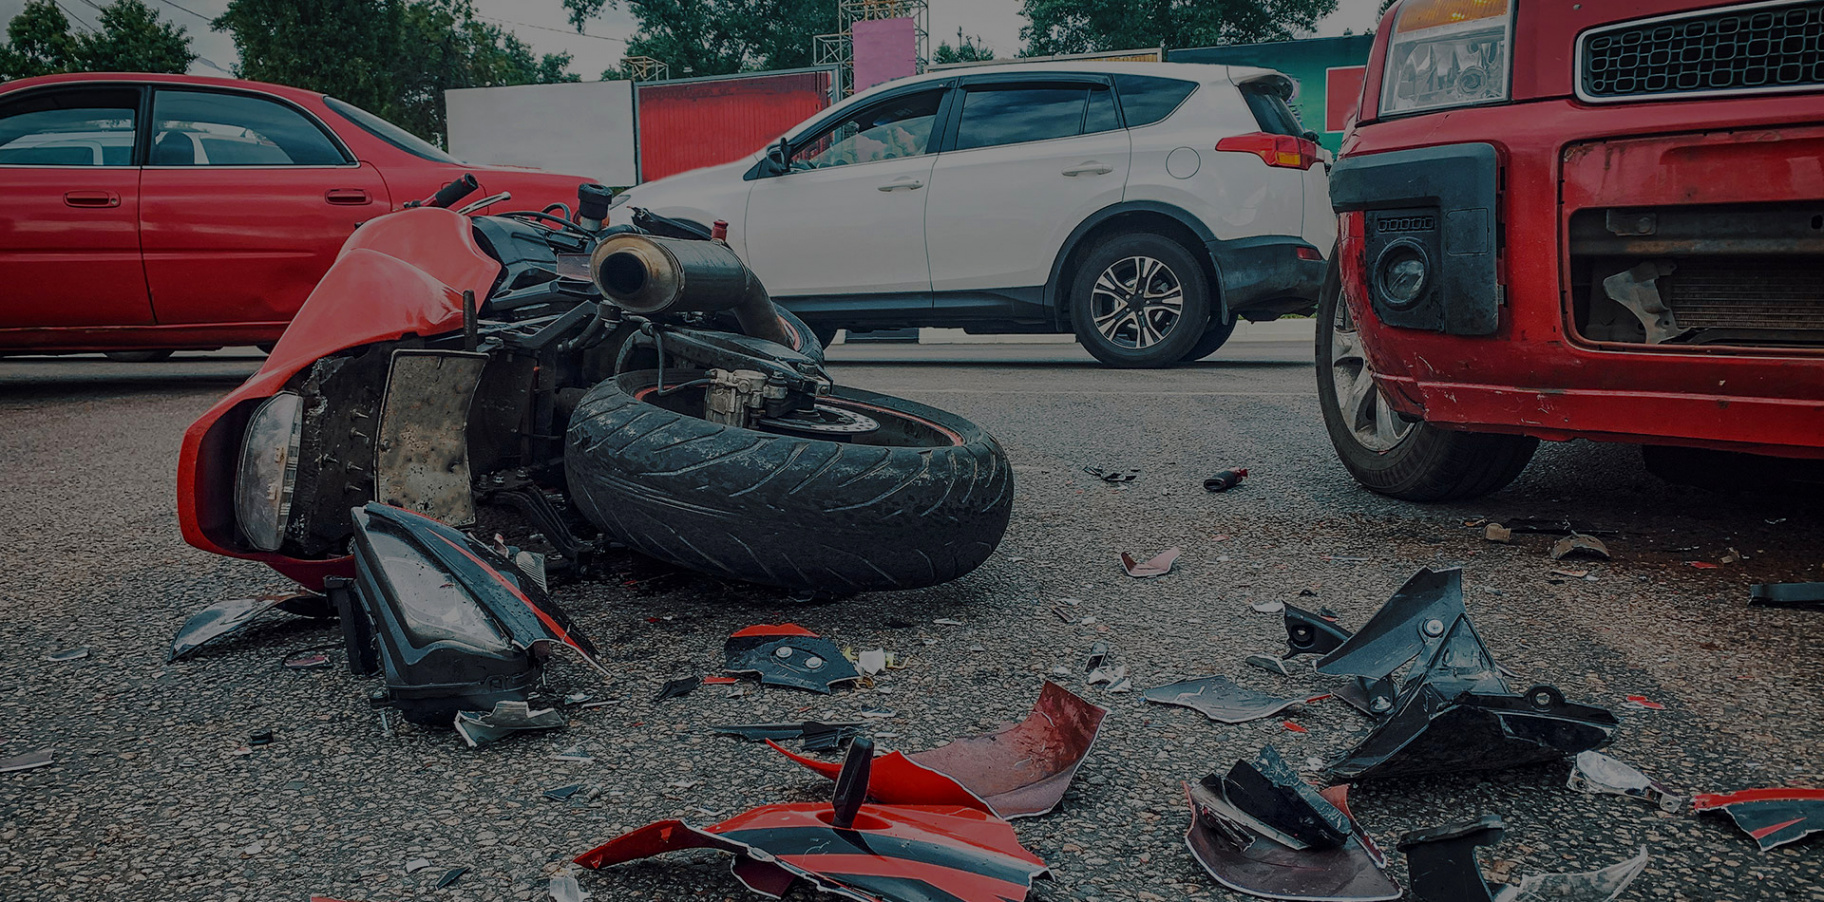 Virginia Beach Motorcycle Accident Lawyer Dans St Louis Motorcycle Accident Lawyer